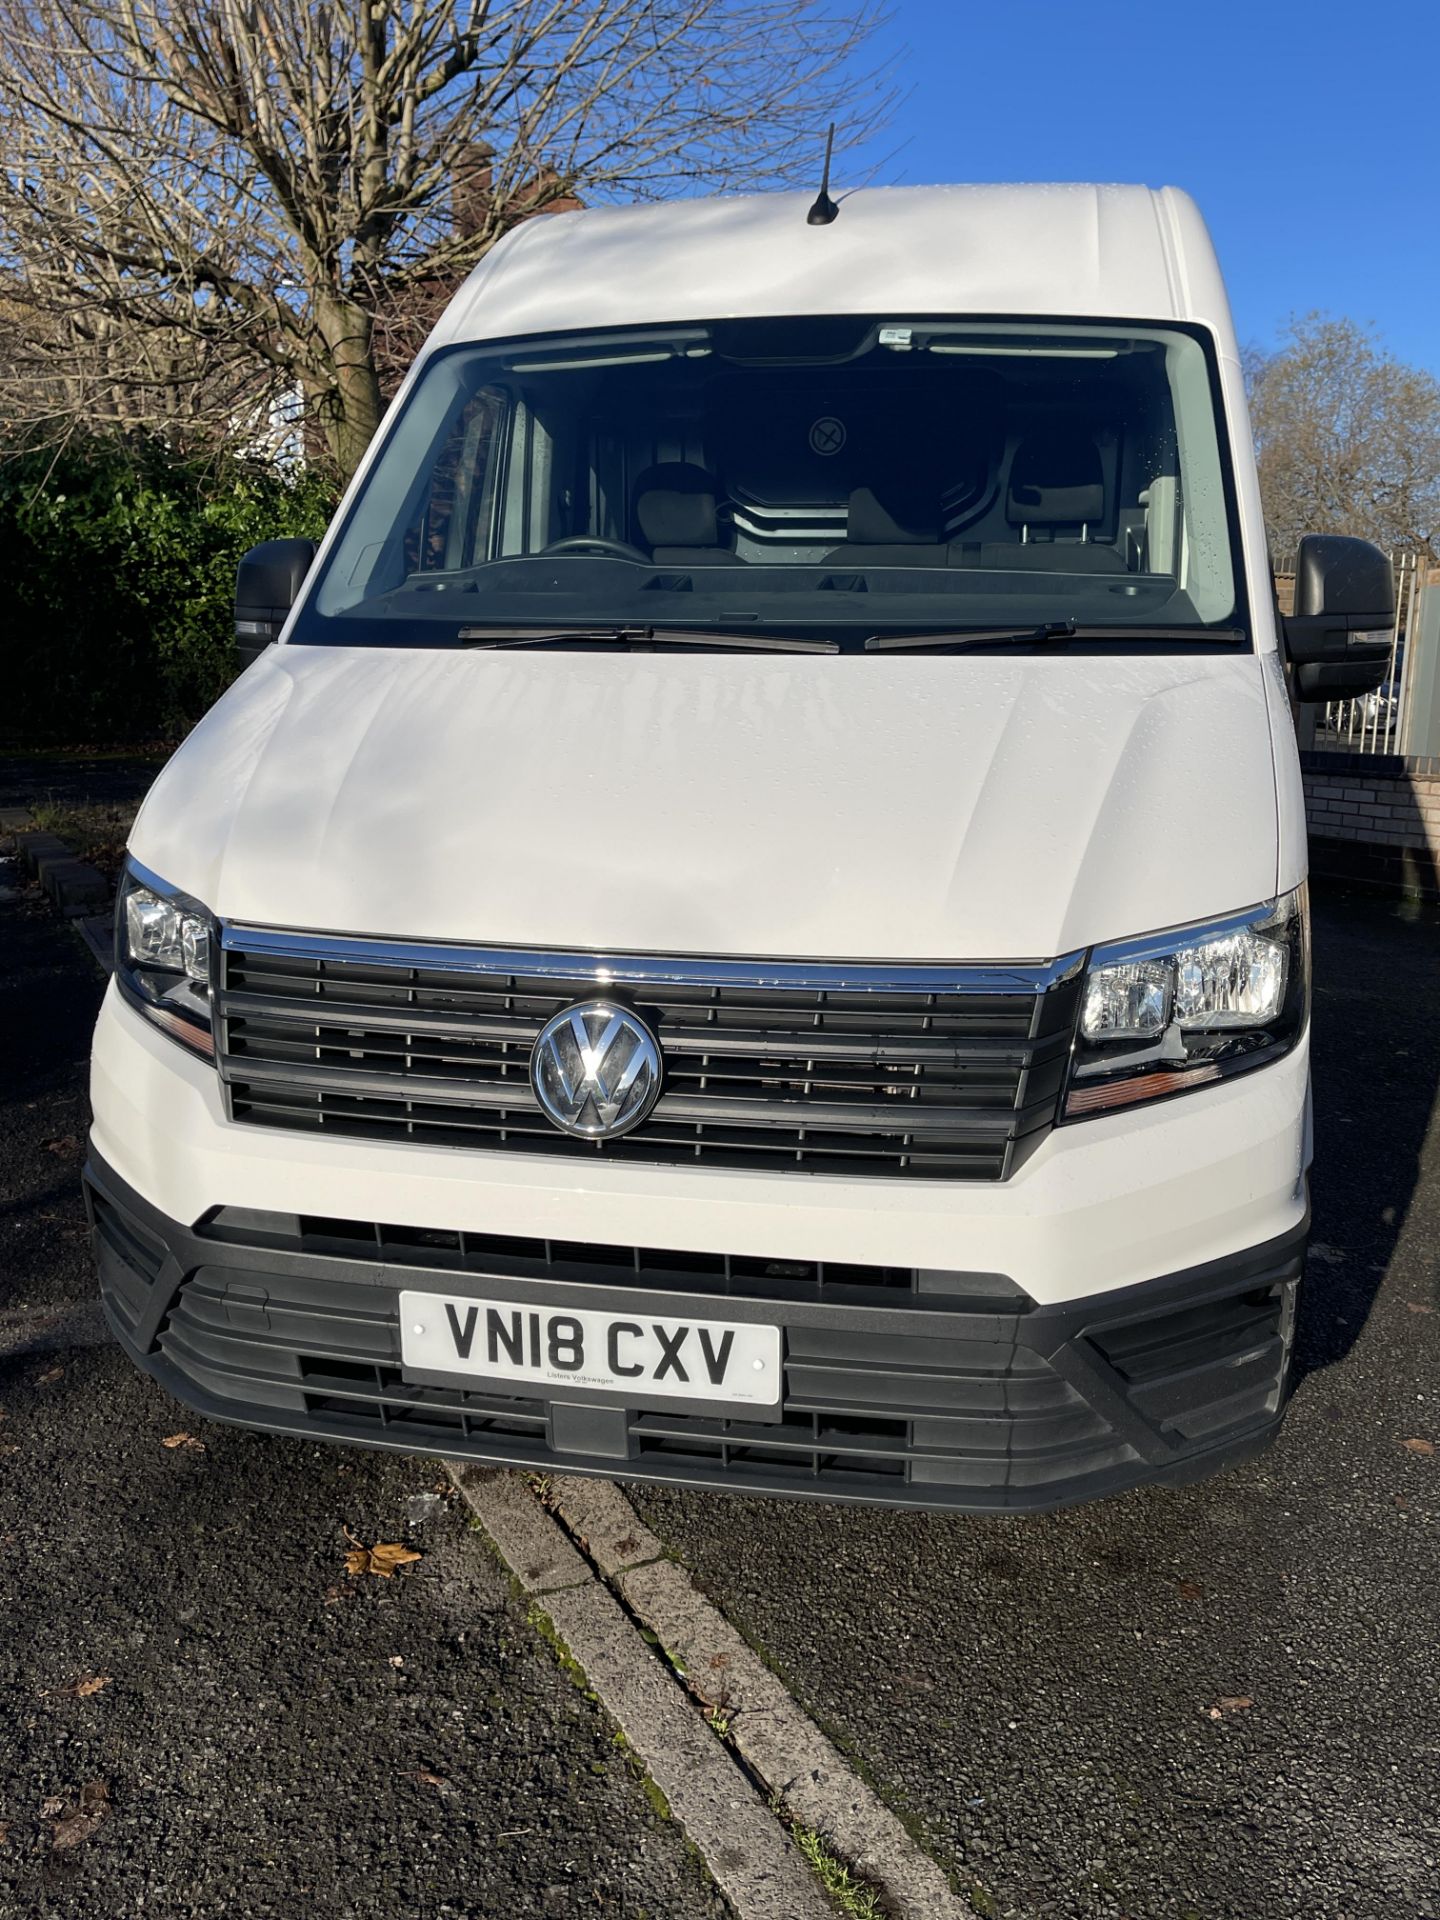 2018 - VW Crafter CR35 102PS Trend Line LWB TDI - Image 17 of 34